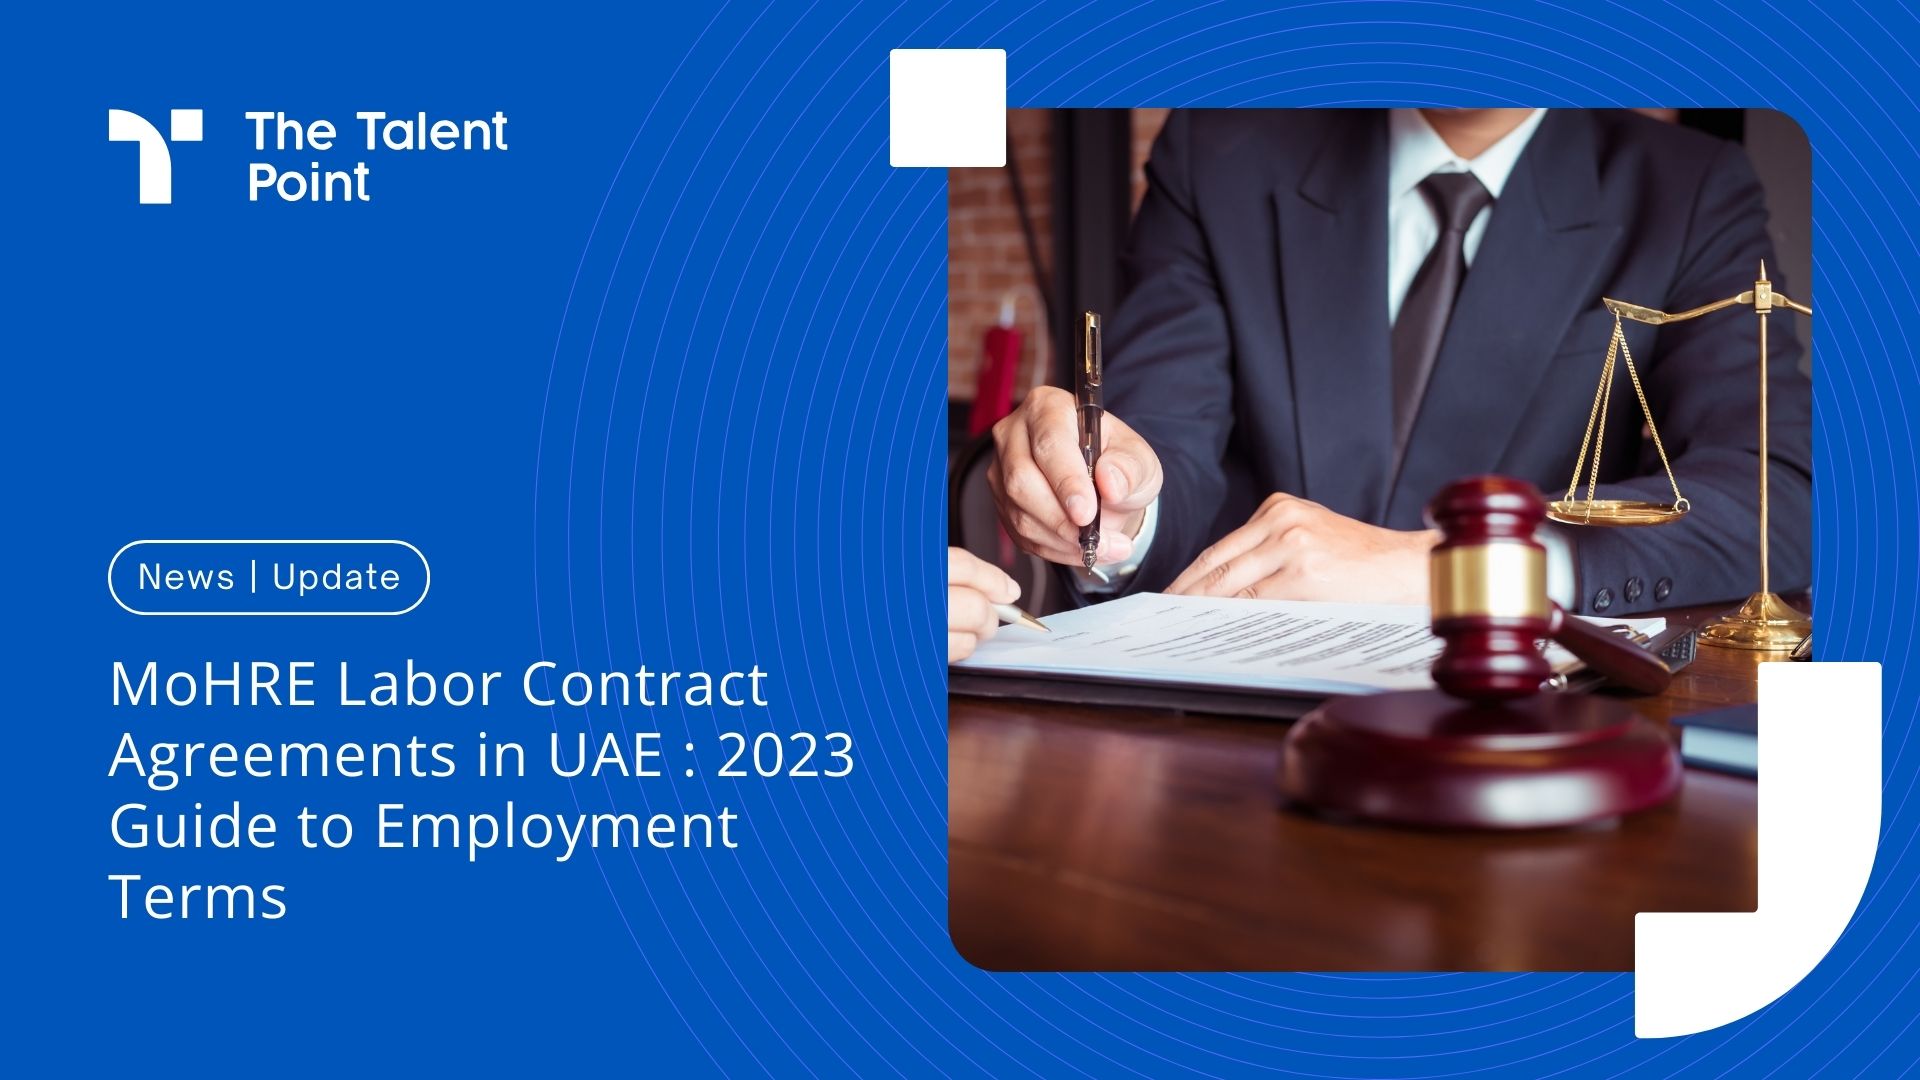 MoHRE Labor Contract Agreements in UAE : 2023 Guide to Employment Terms